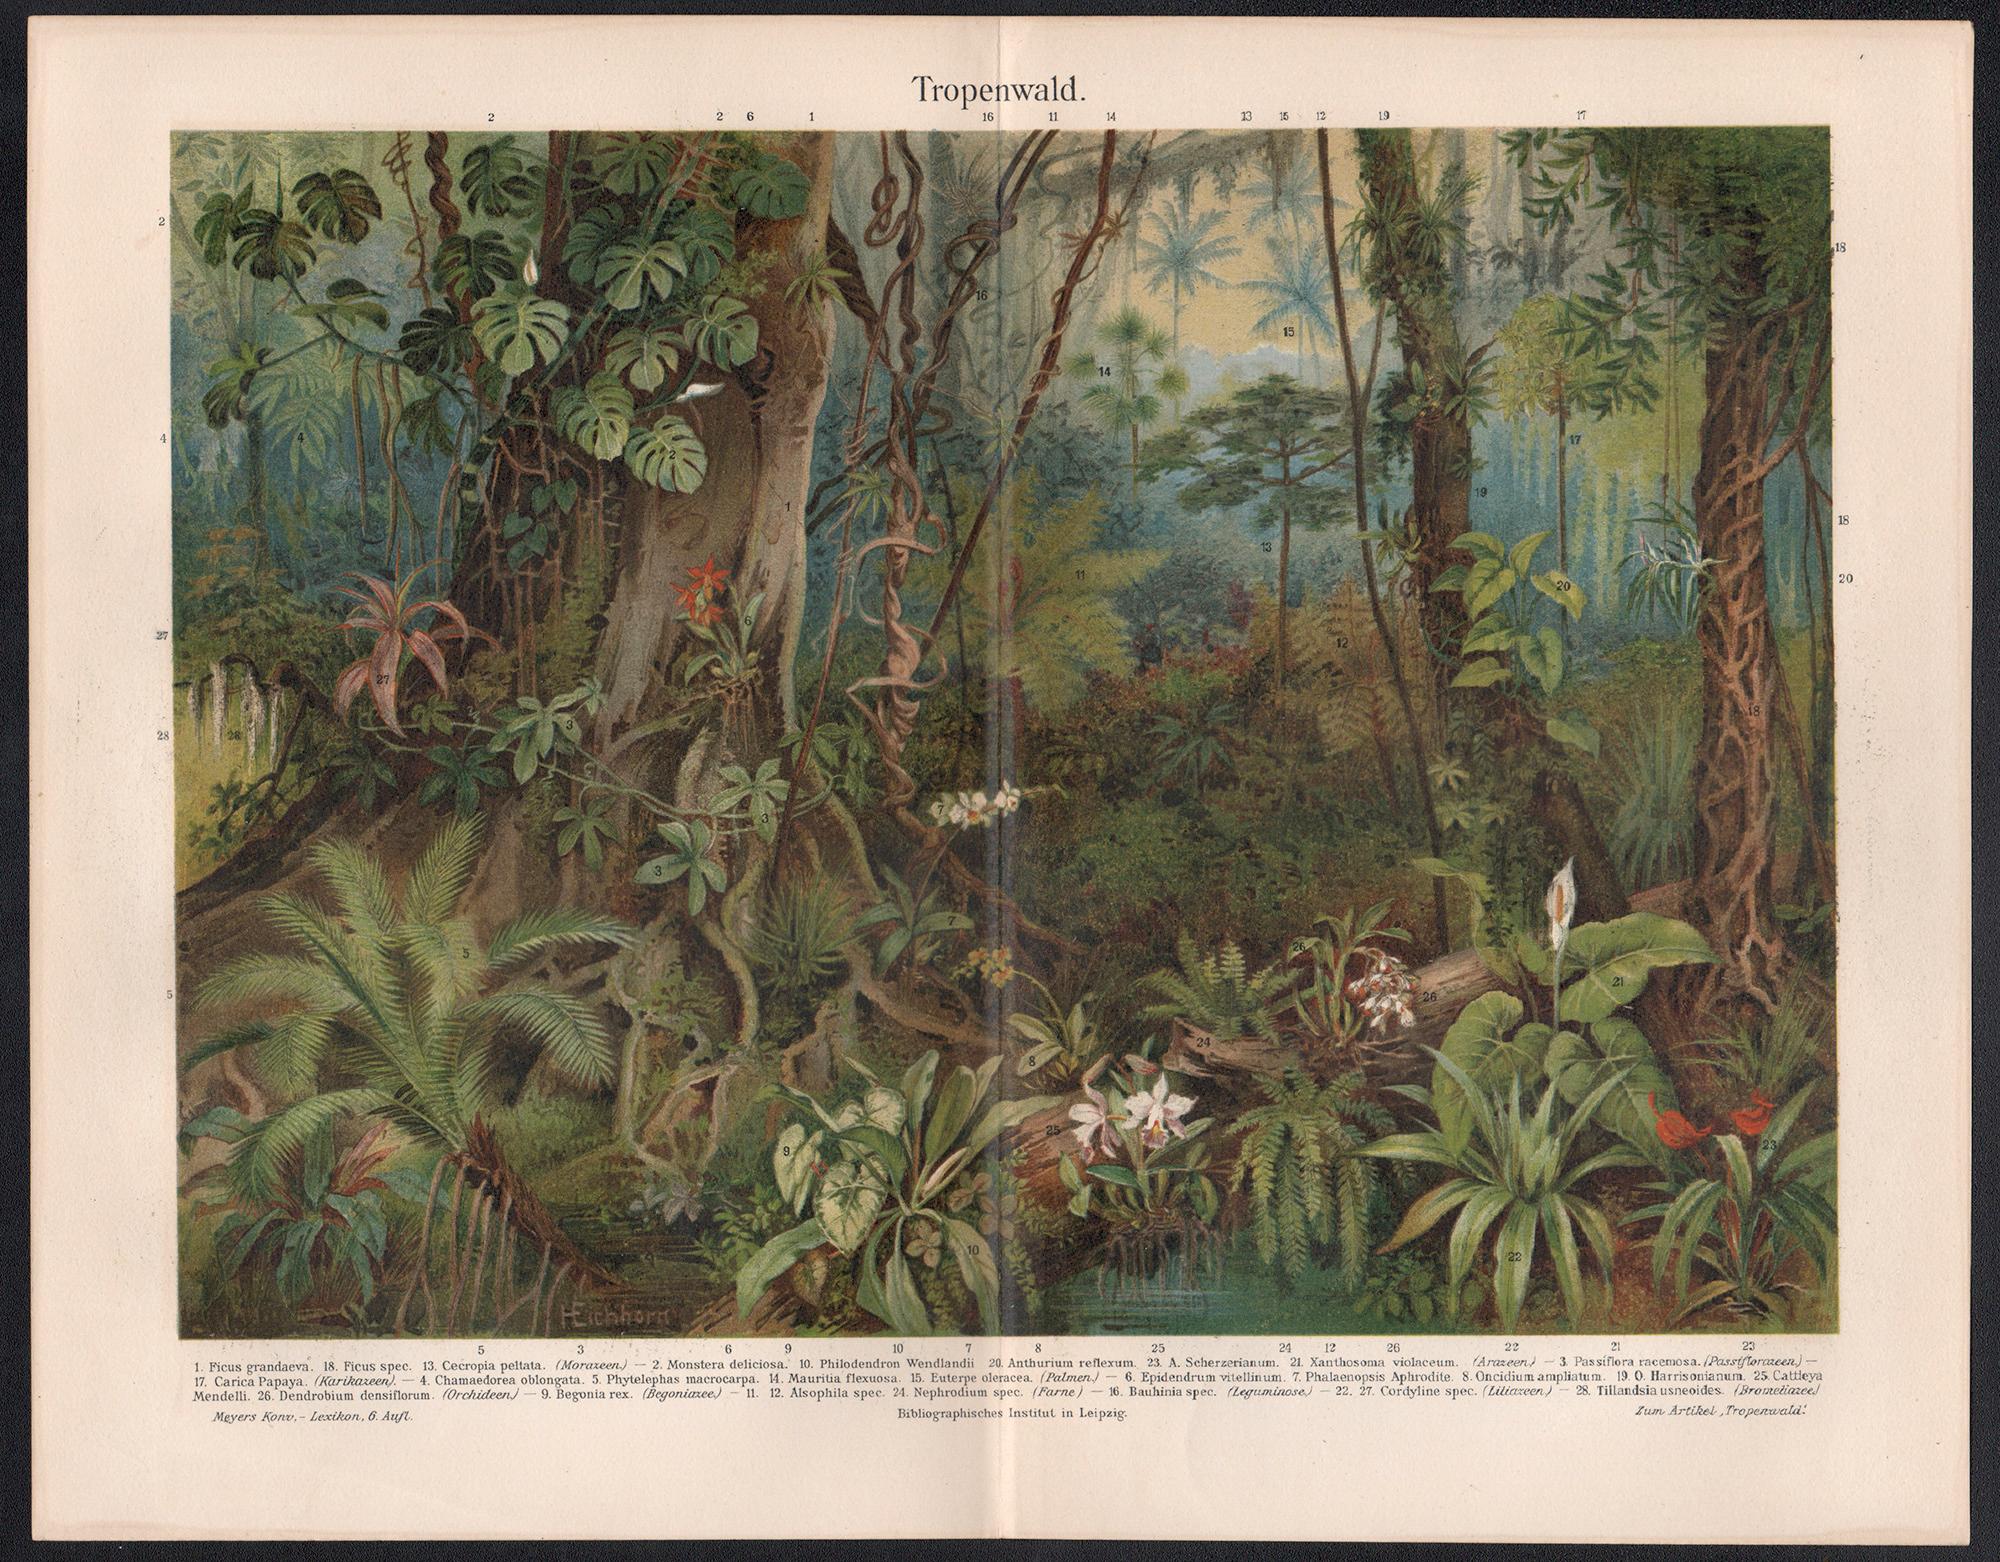 Tropenwald (Tropical Forest), German antique botanical print - Print by Unknown